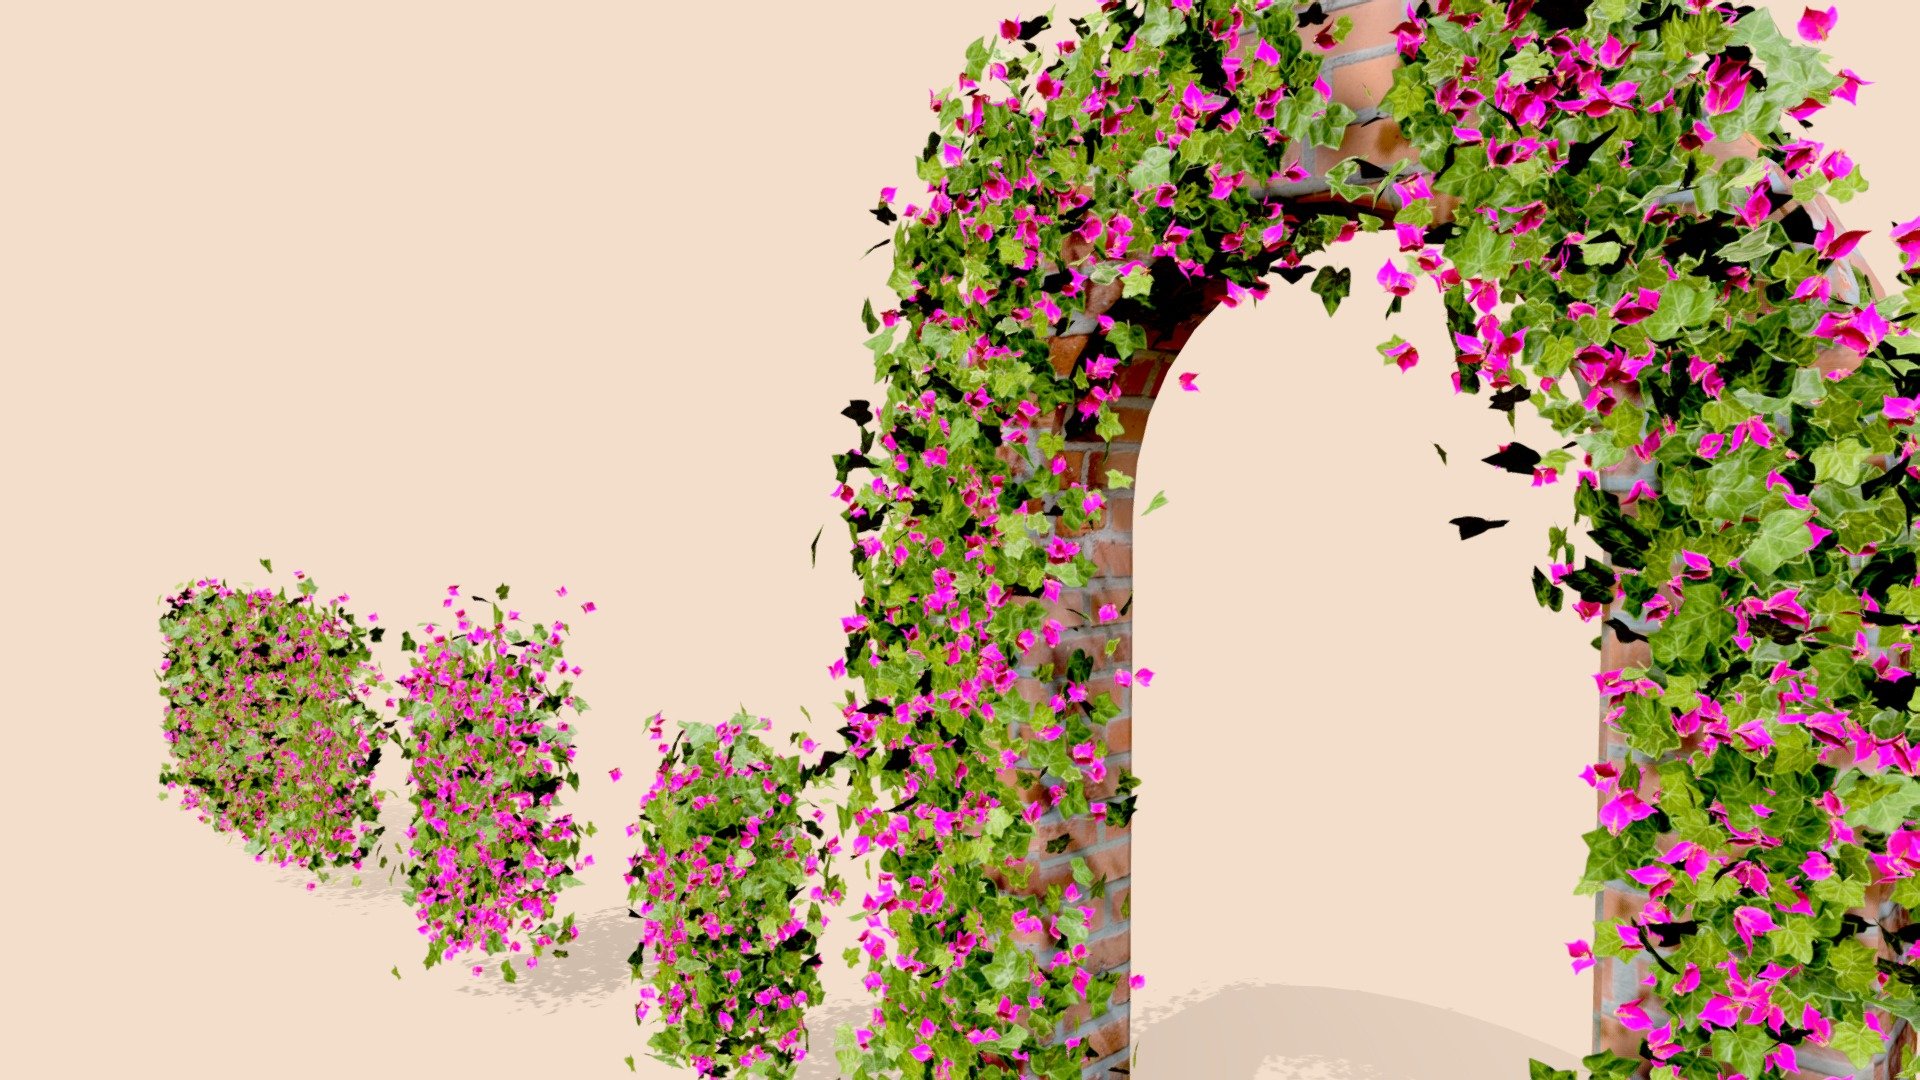 Bougainvillea Flowers vol.2

the most beautiful plant ever
Add it to your scenes to take your project to the next level ❤️🌈😊😇

Check also the vol.1 you may like that one too 😁

*obj, fbx, glb/gltf and blender file included - Bougainvillea Flowers vol.2 - Buy Royalty Free 3D model by ahingel 3d model